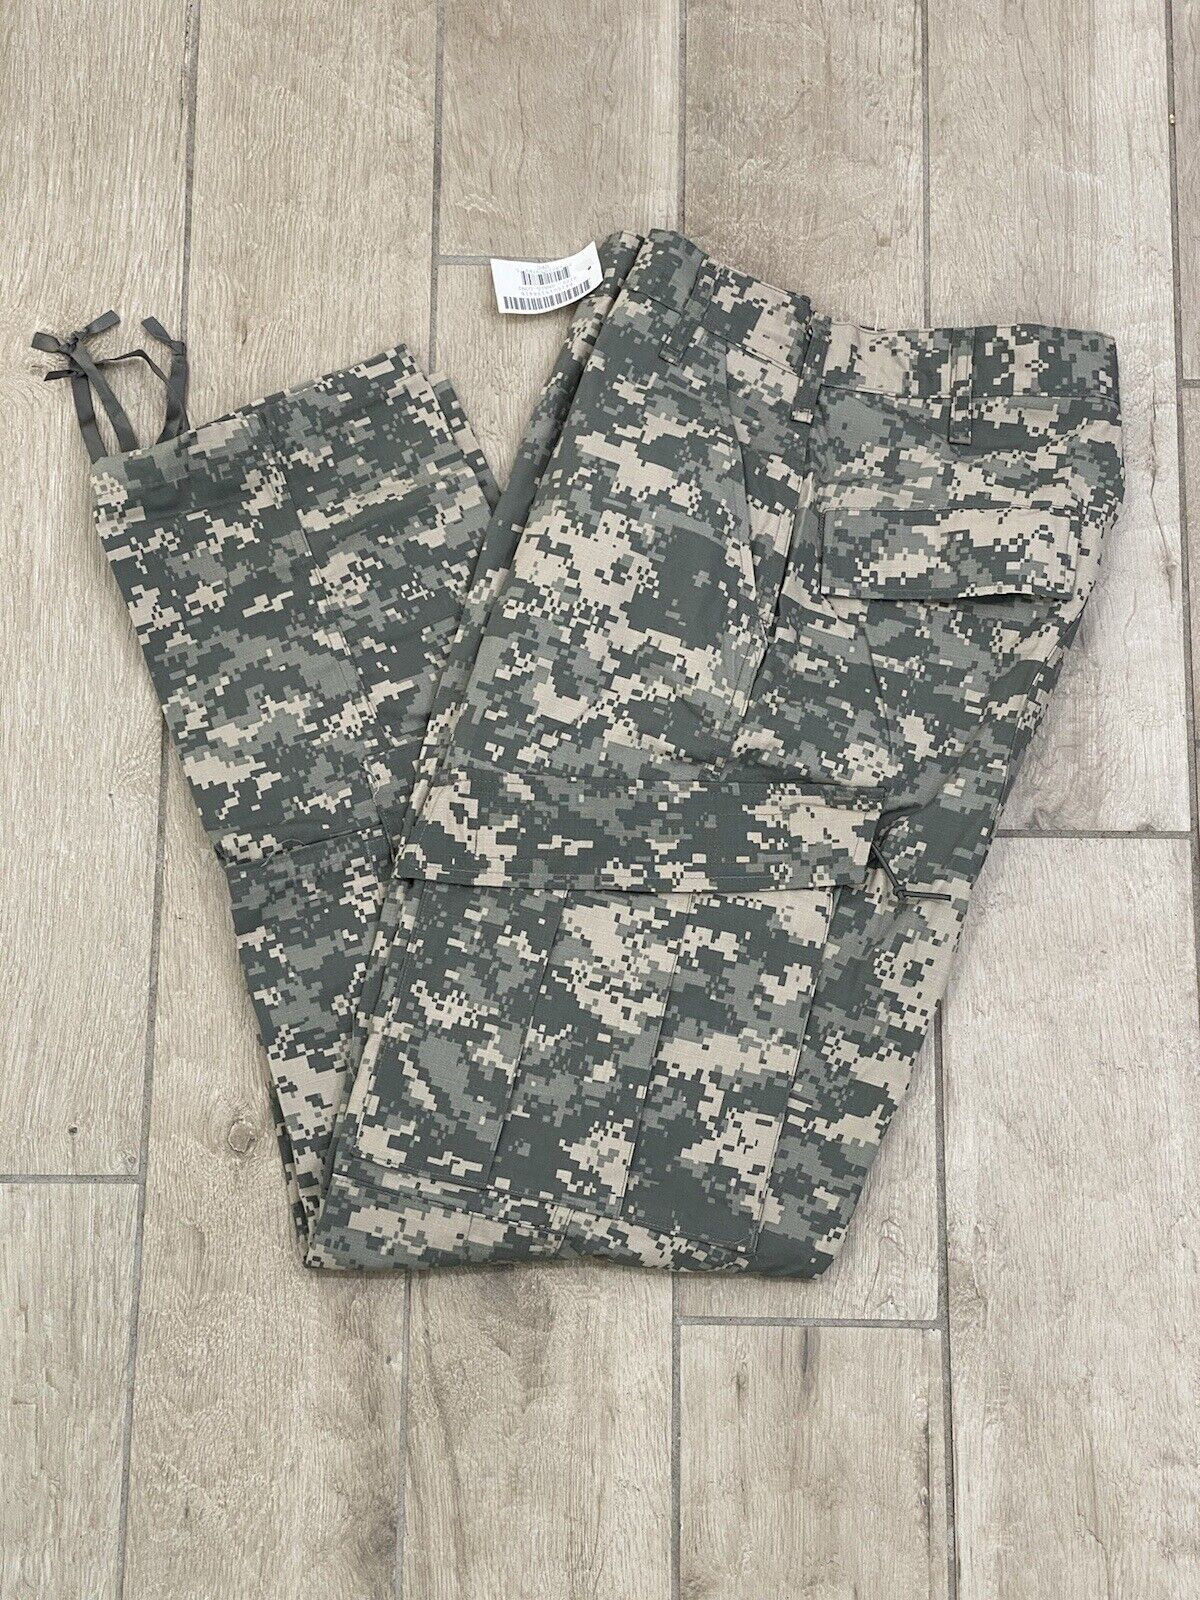 NEW US Army Combat Uniform Trousers Pants ACU Camouflage - Mens Small-Long